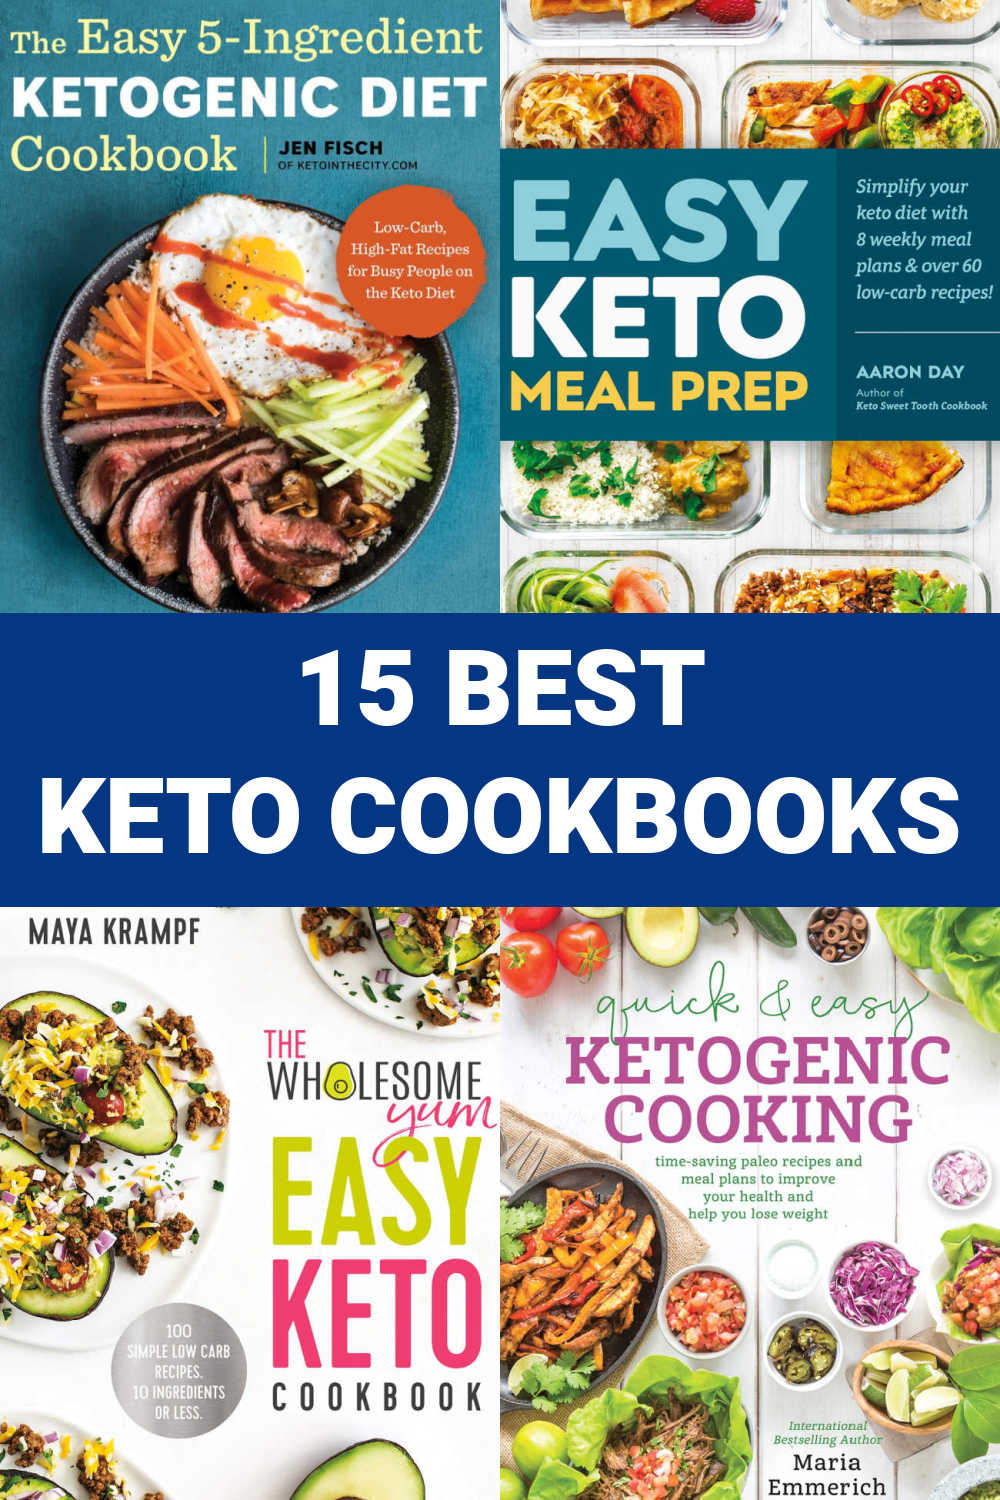 15 Best Keto Cookbooks - The top books for the low carb ketogenic diet lifestyle - full of easy recipes and cookbook ideas for beginners to low-carb cooking